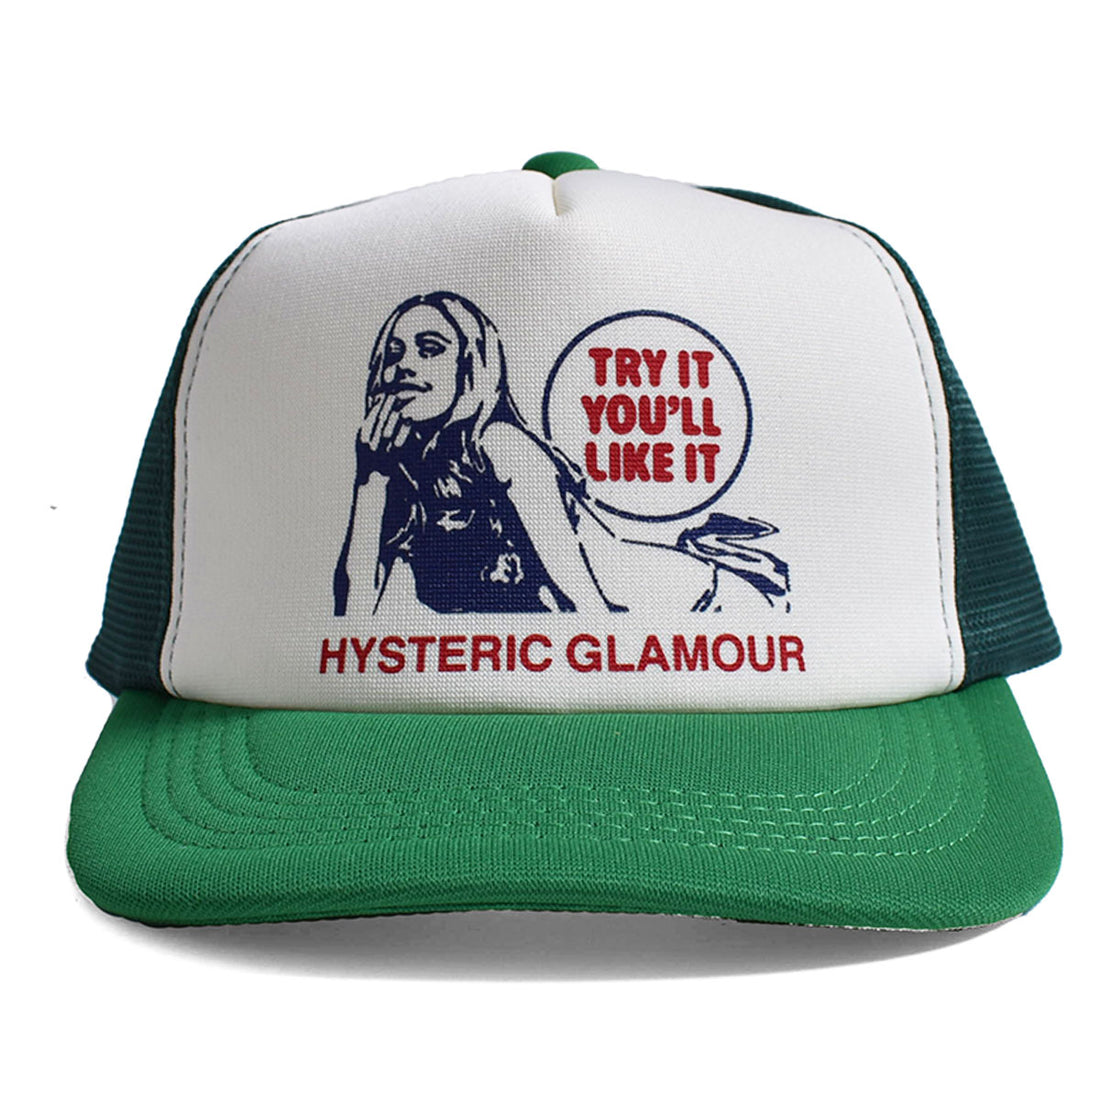 [HYSTERIC GLAMOUR]TRY IT YOU'LL LIKE IT メッシュキャップ/GREEN(02231QH04)